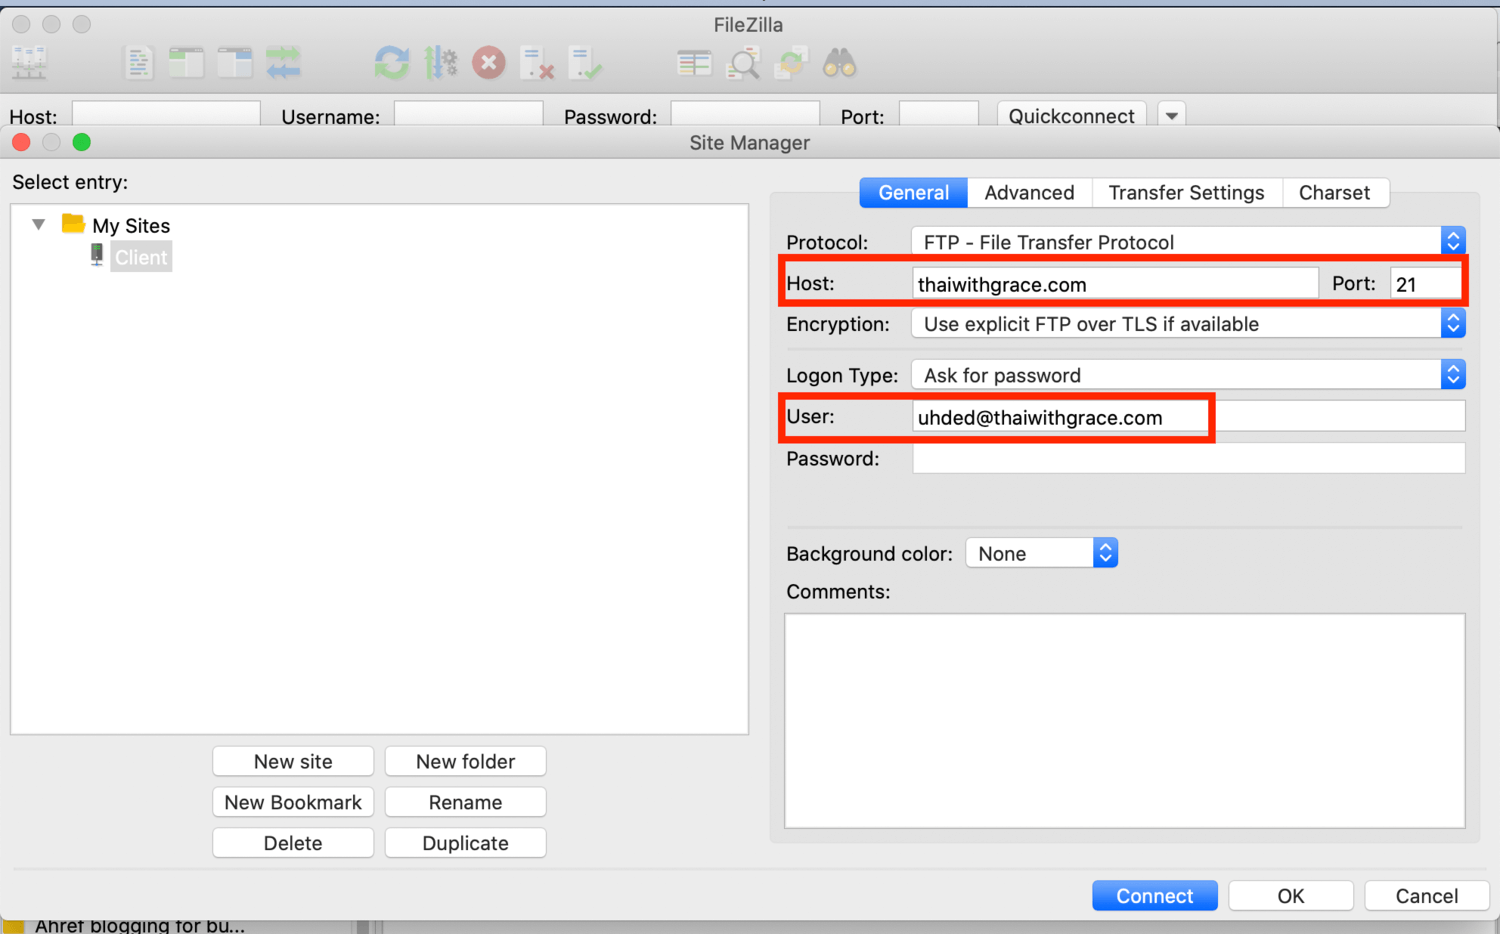 Screenshot on how to conect to your FTP account using FileZilla